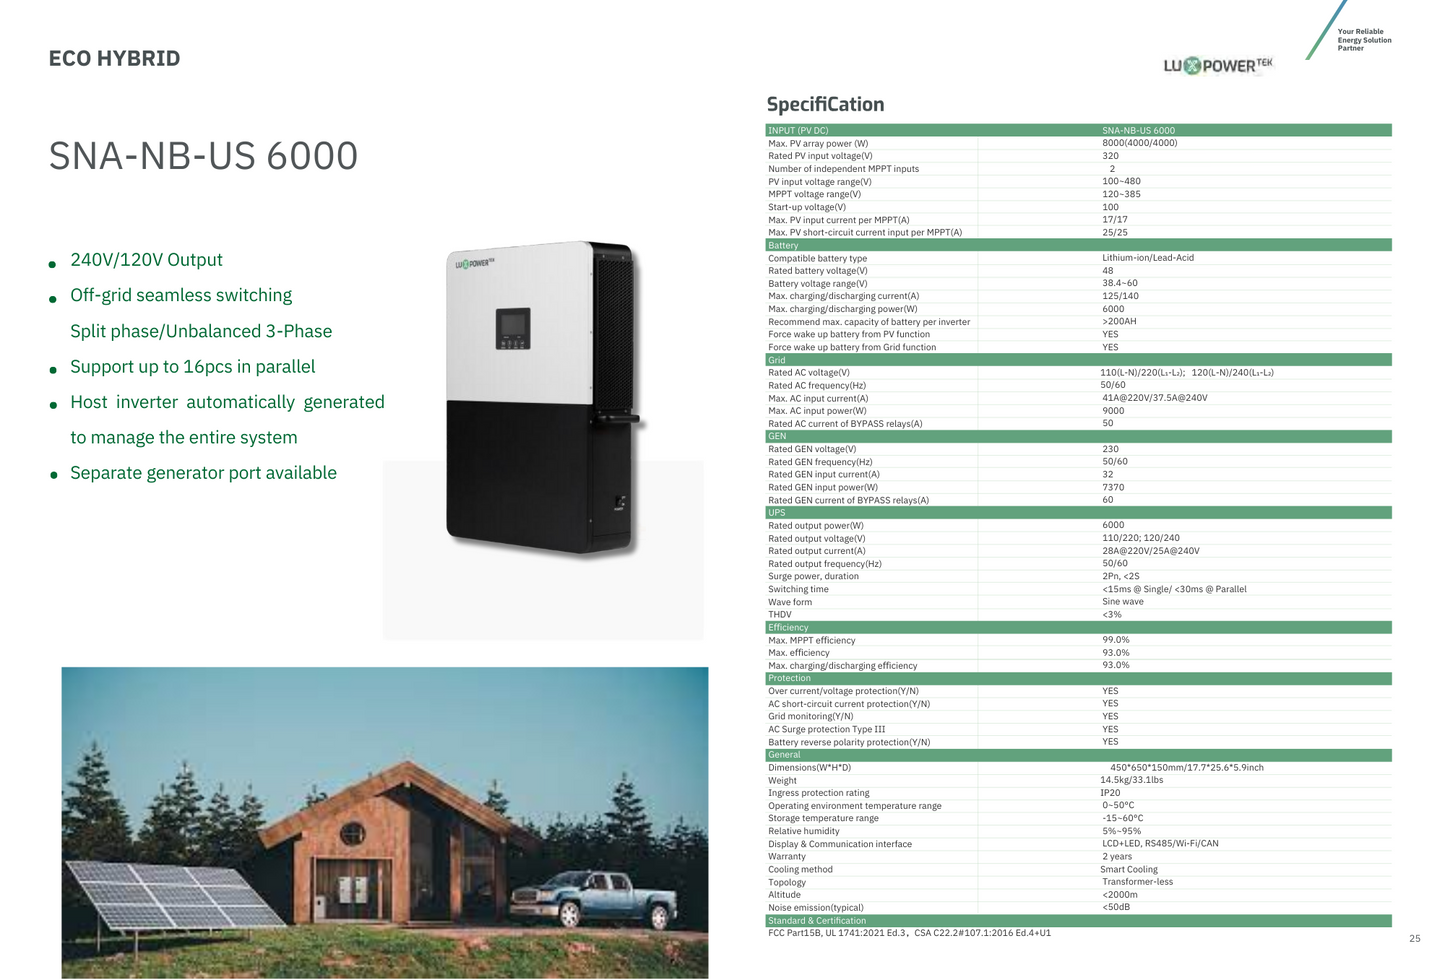 LXP-LB-US 12k | 12 KW / 6 KW to battery = 18 KW total | LuxPower | Mann Solar | Off-Grid/ Hybrid Equipment